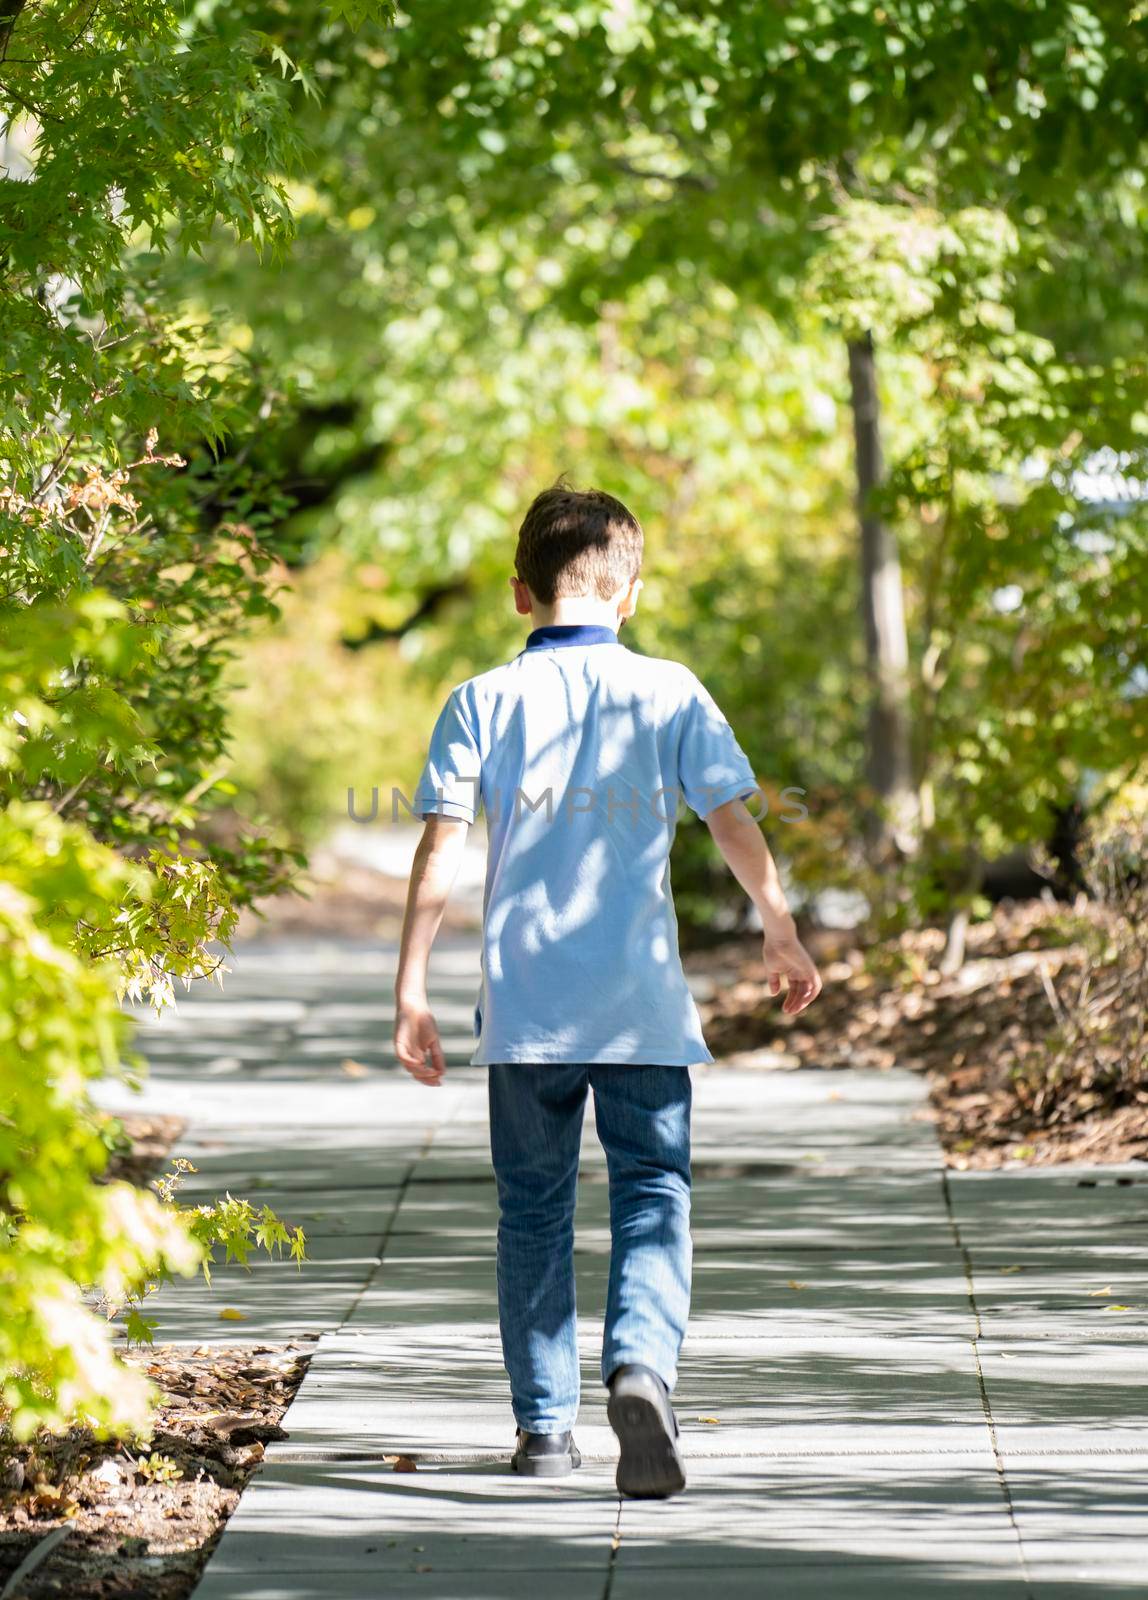 Blond teenage boy casual clothing walking relaxed along alley with trees and shadows. Bushes as blurred background. by papatonic